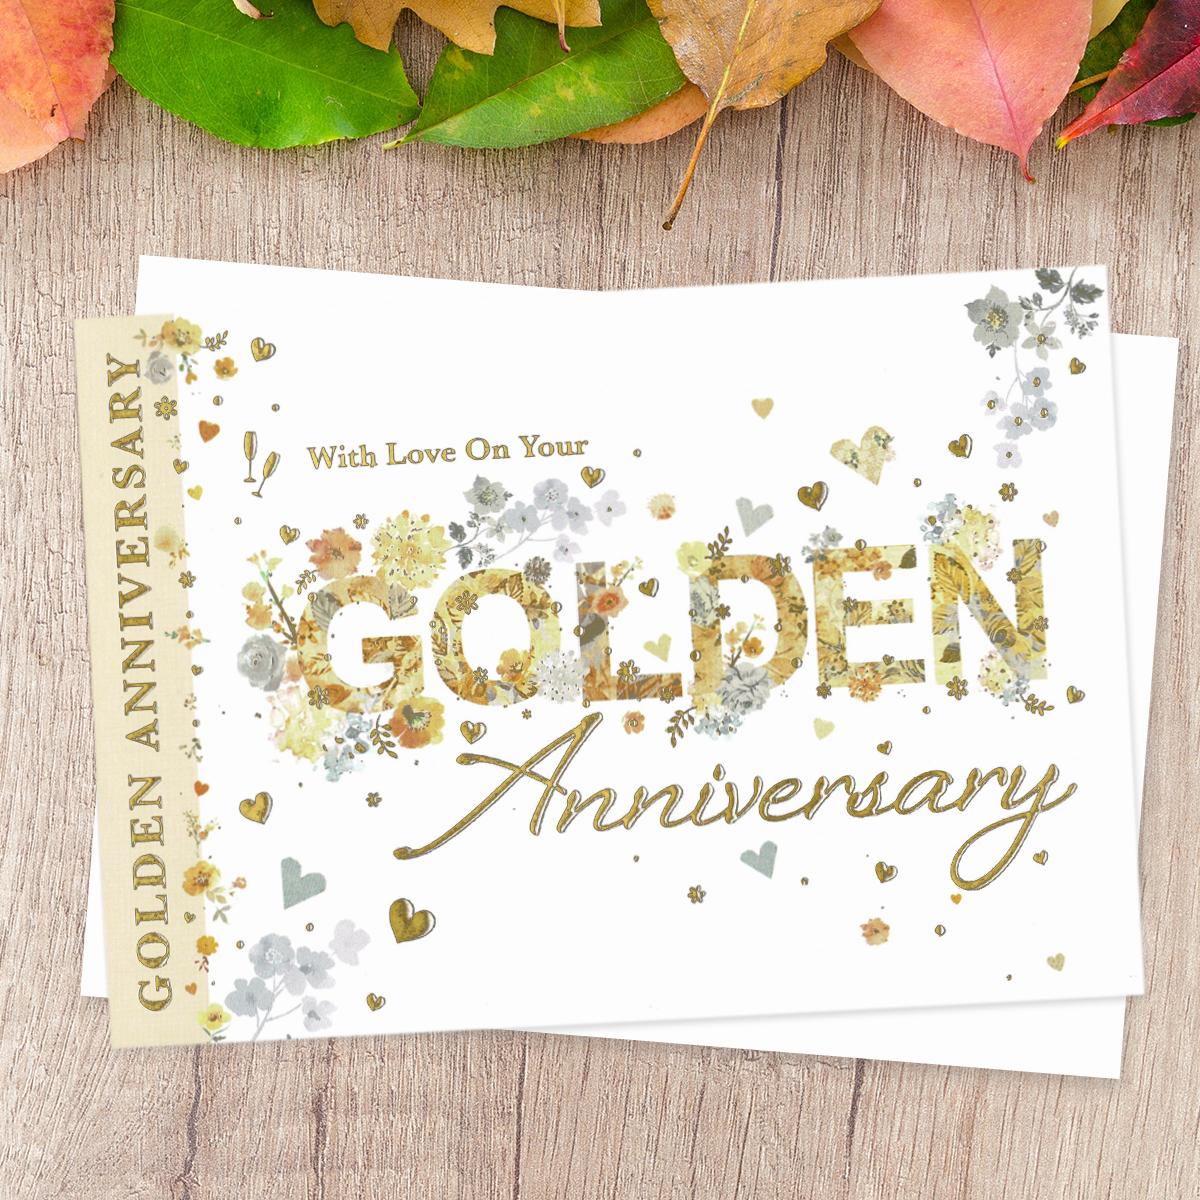 ' With Love On Your Golden Anniversary' Card Featuring Beautiful Golden Coloured Floral Lettering Enhanced With Gold Foil. With White Envelope